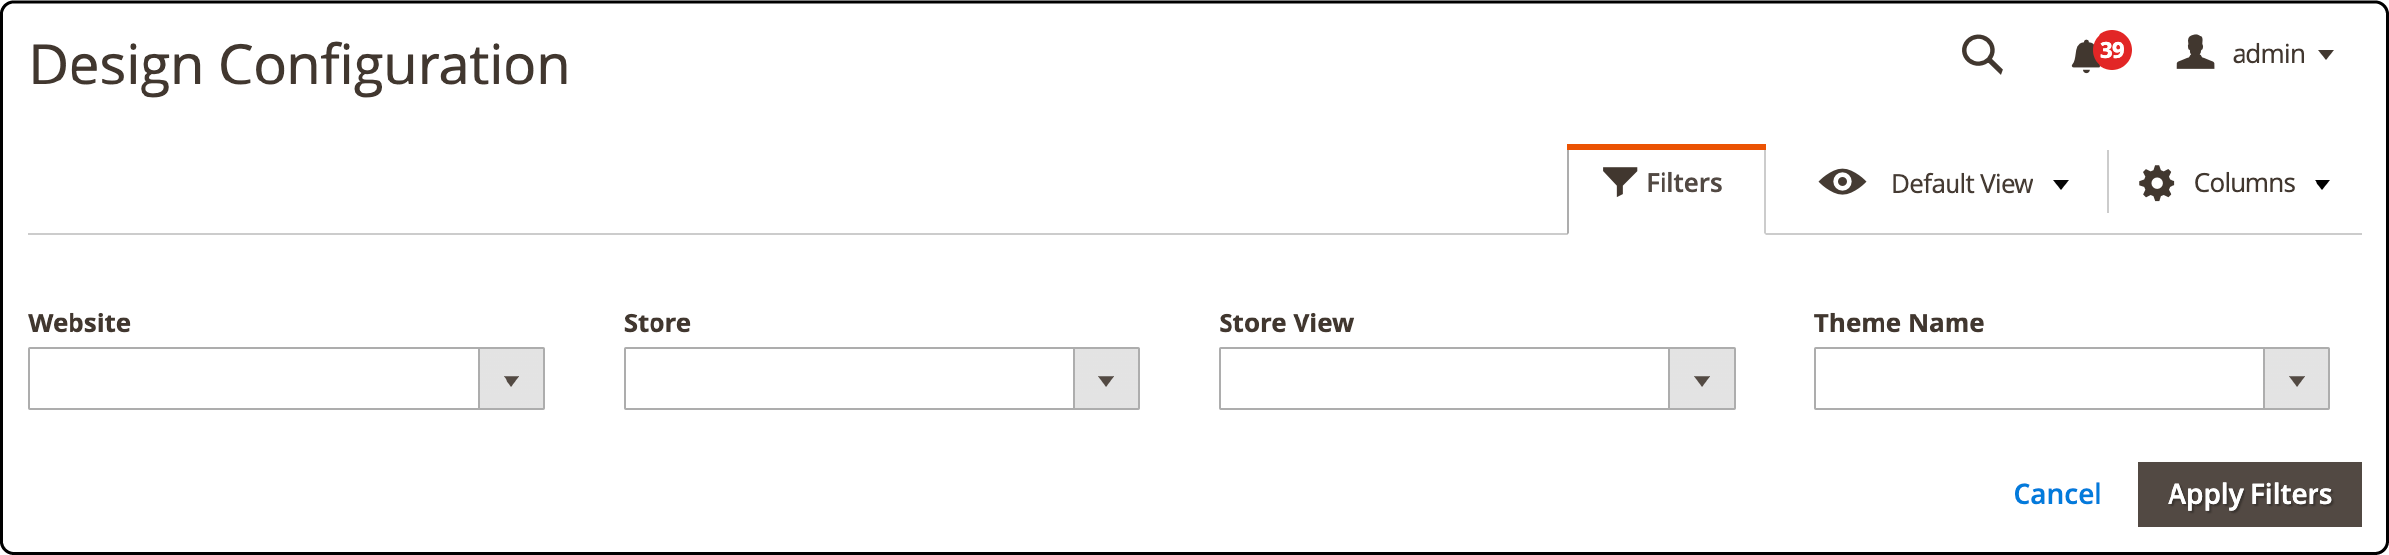 Step-by-step guide on filtering theme grid in Magento 2 for theme selection